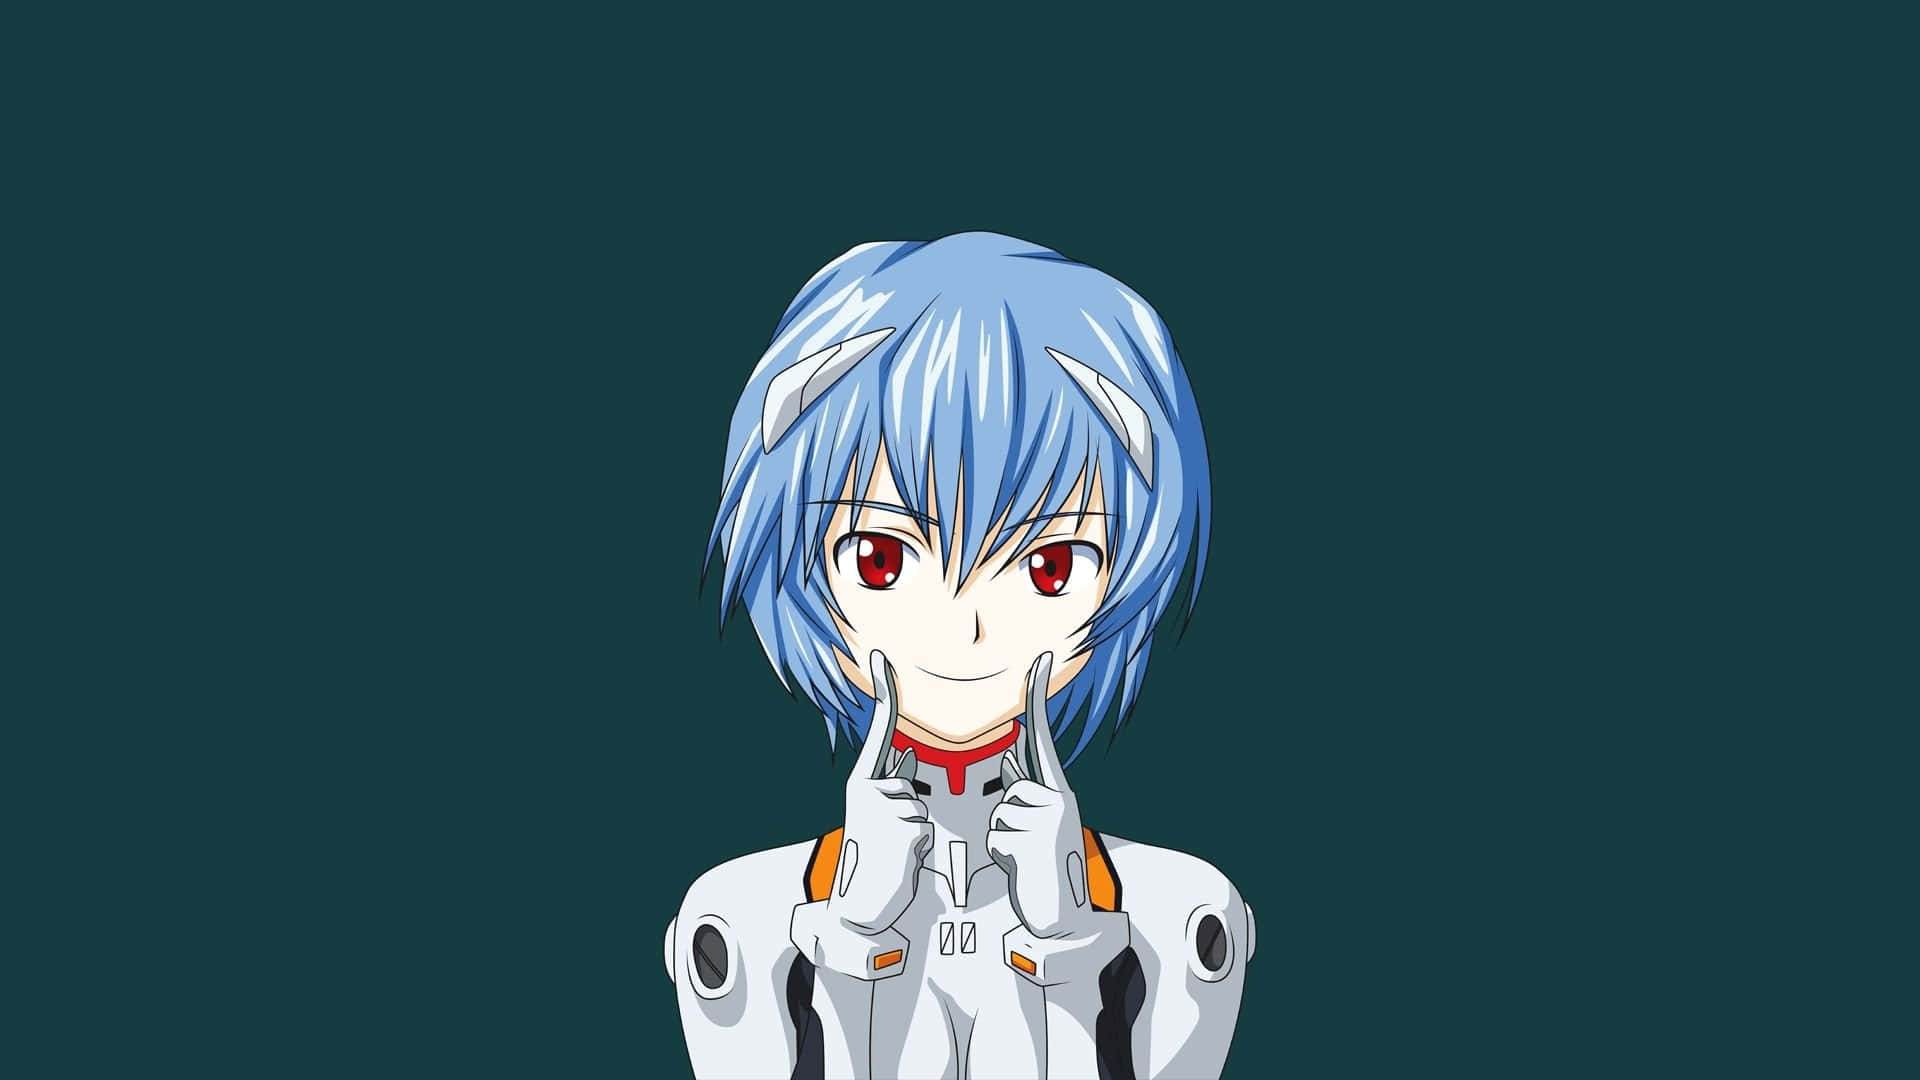 Rei Ayanami - Beautiful Stance In The Iconic Blue Jumpsuit Background